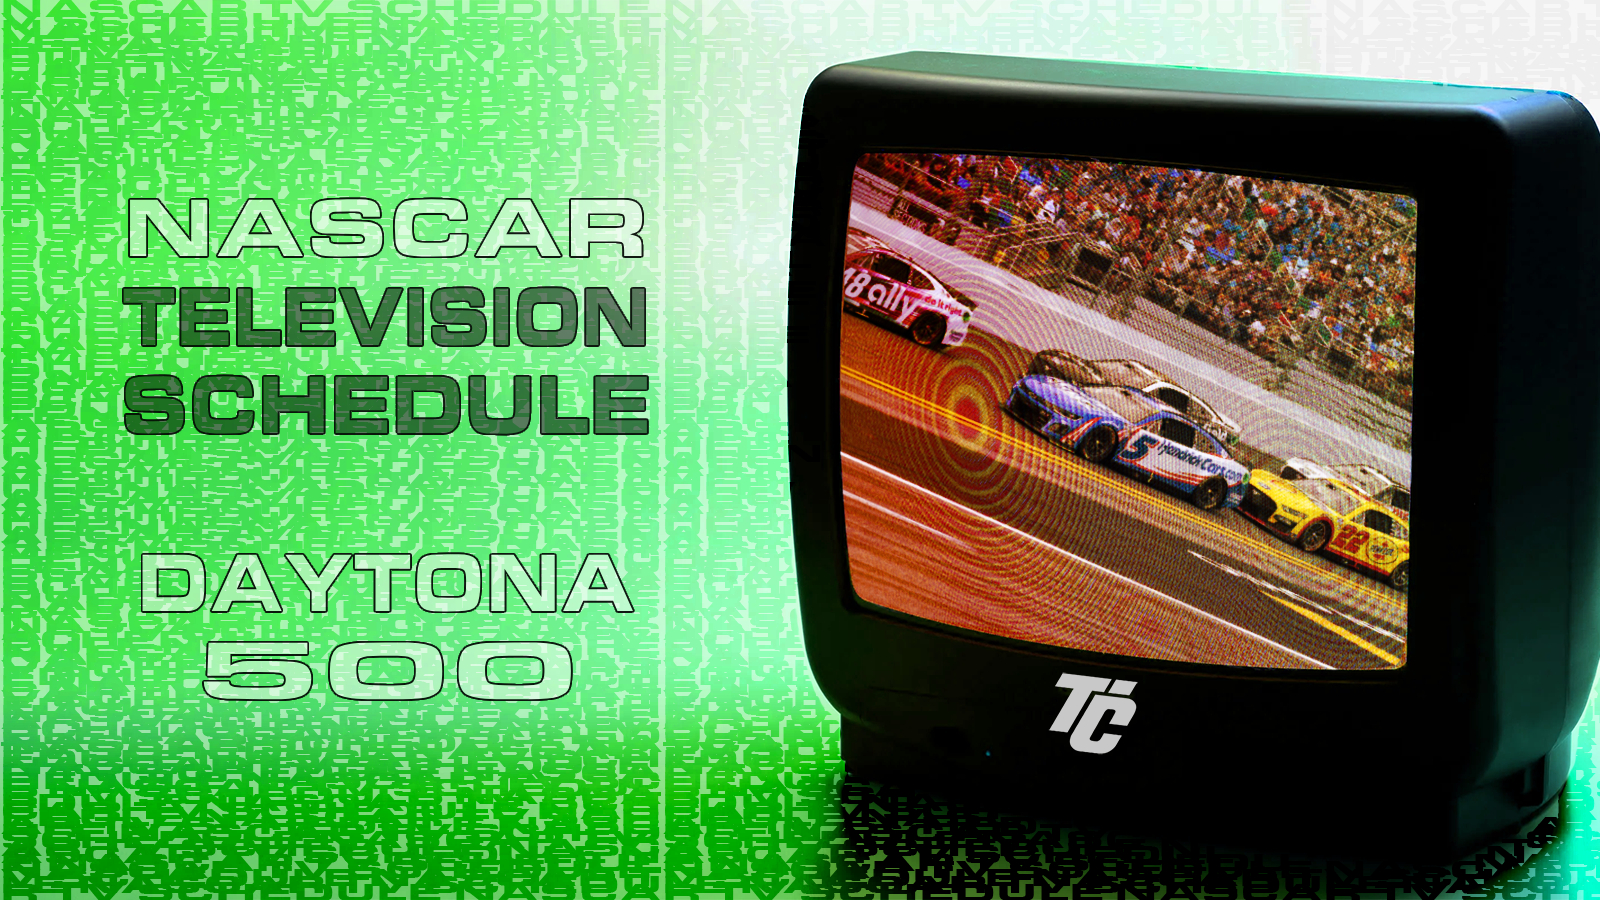 NASCAR TV Schedule Daytona 500 How to watch NASCAR what channel is NASCAR on? What time does the Daytona 500 start?